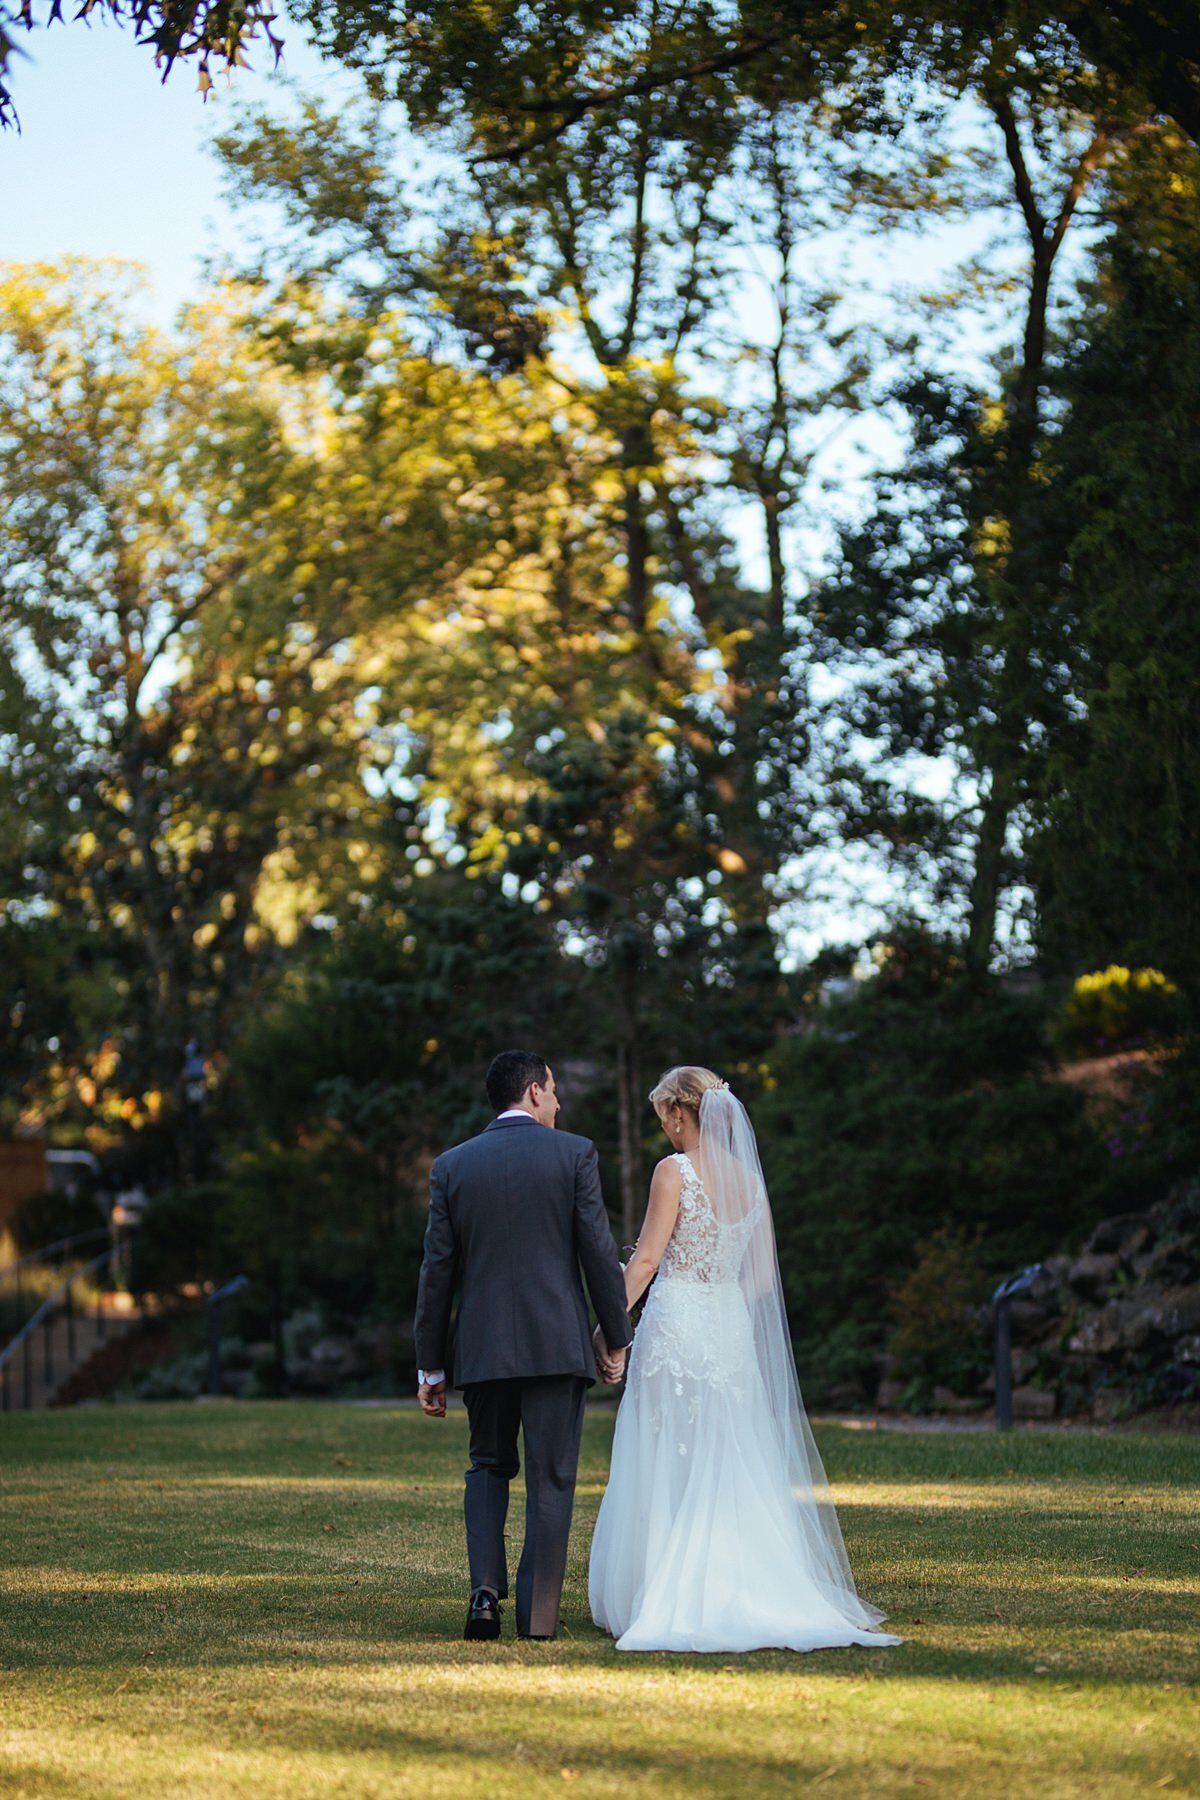 the bride, wearing a long sleeveless lace wedding dress and long sheer veil and the groom wearing a charcoal gray tuxedo hold hands as they walk away through the garden at Cheekwood